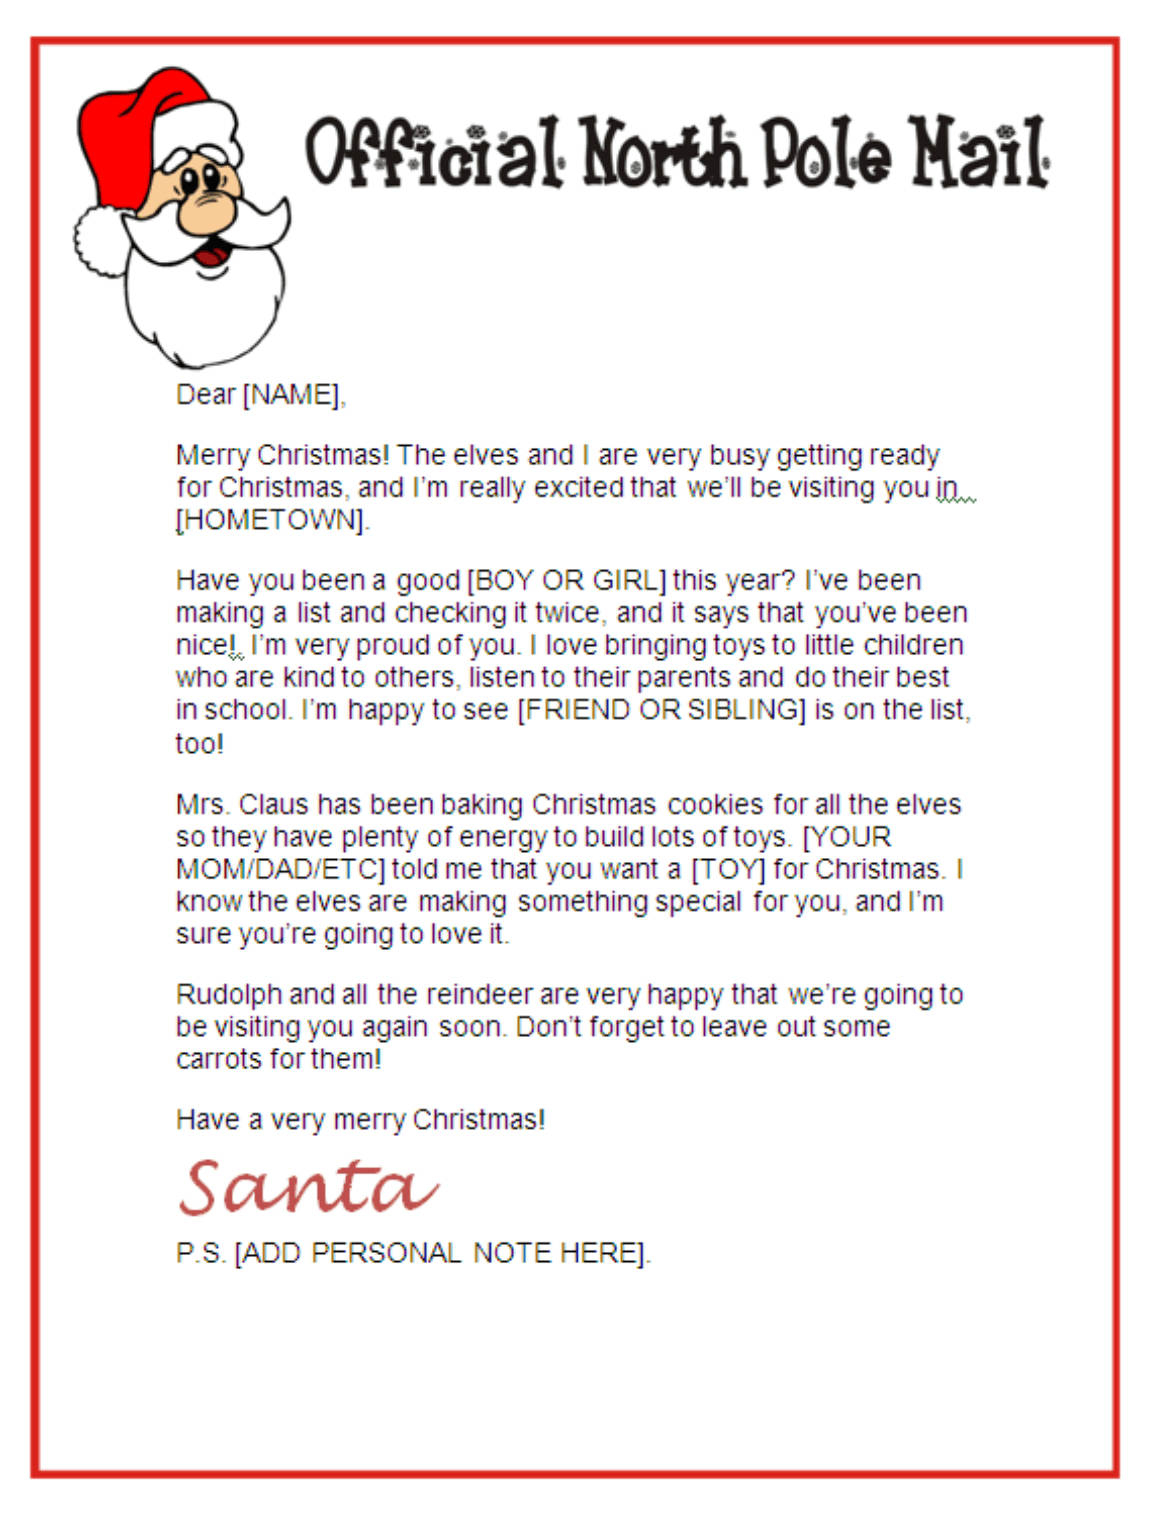 Santa Letter Stationary – Official North Pole Mail In Santa Letter Template Word